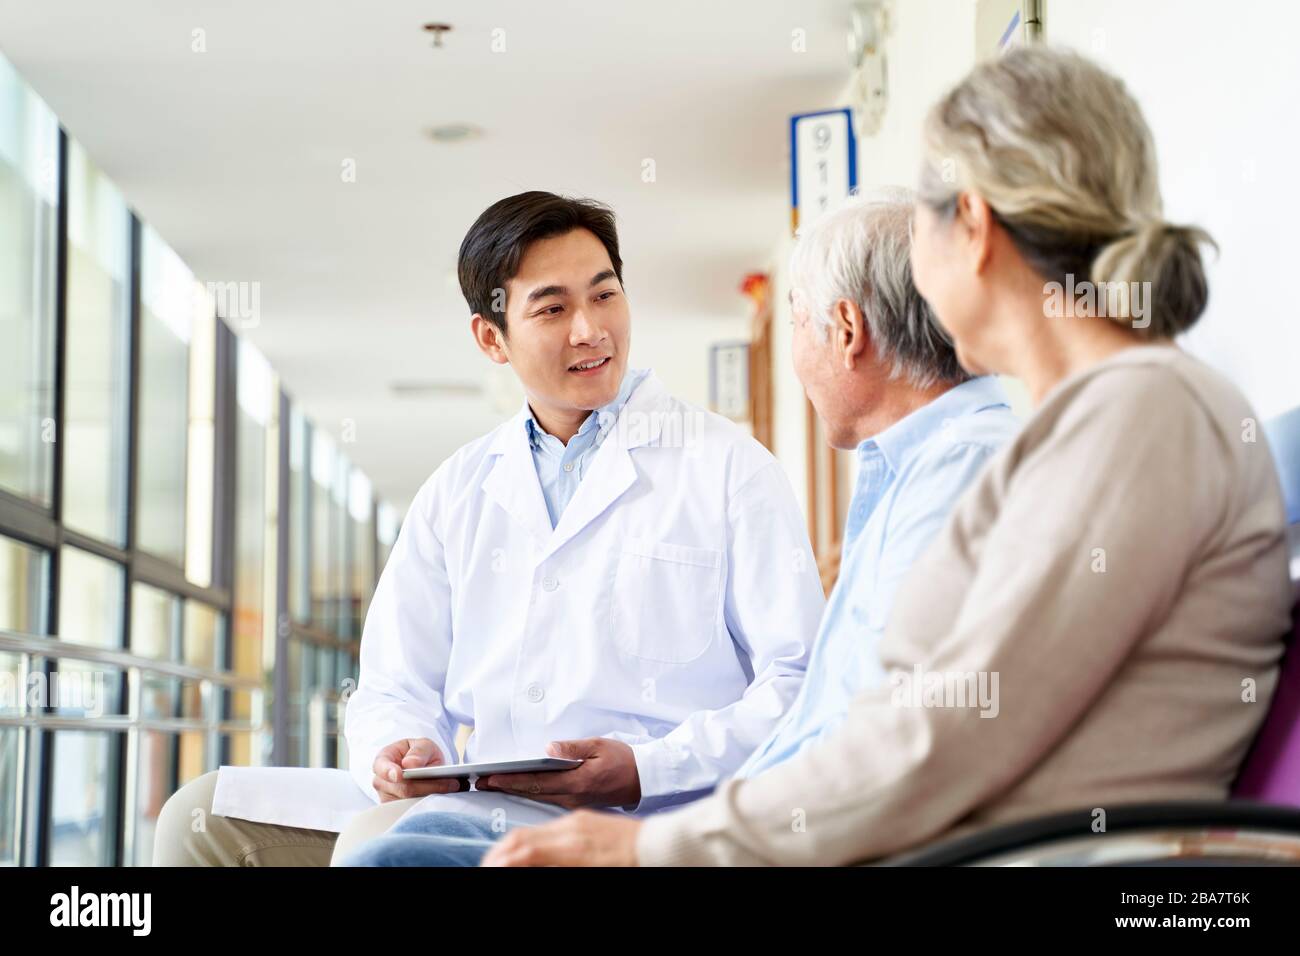 friendly young asian doctor talking to old couple in hospital hallway Stock Photo